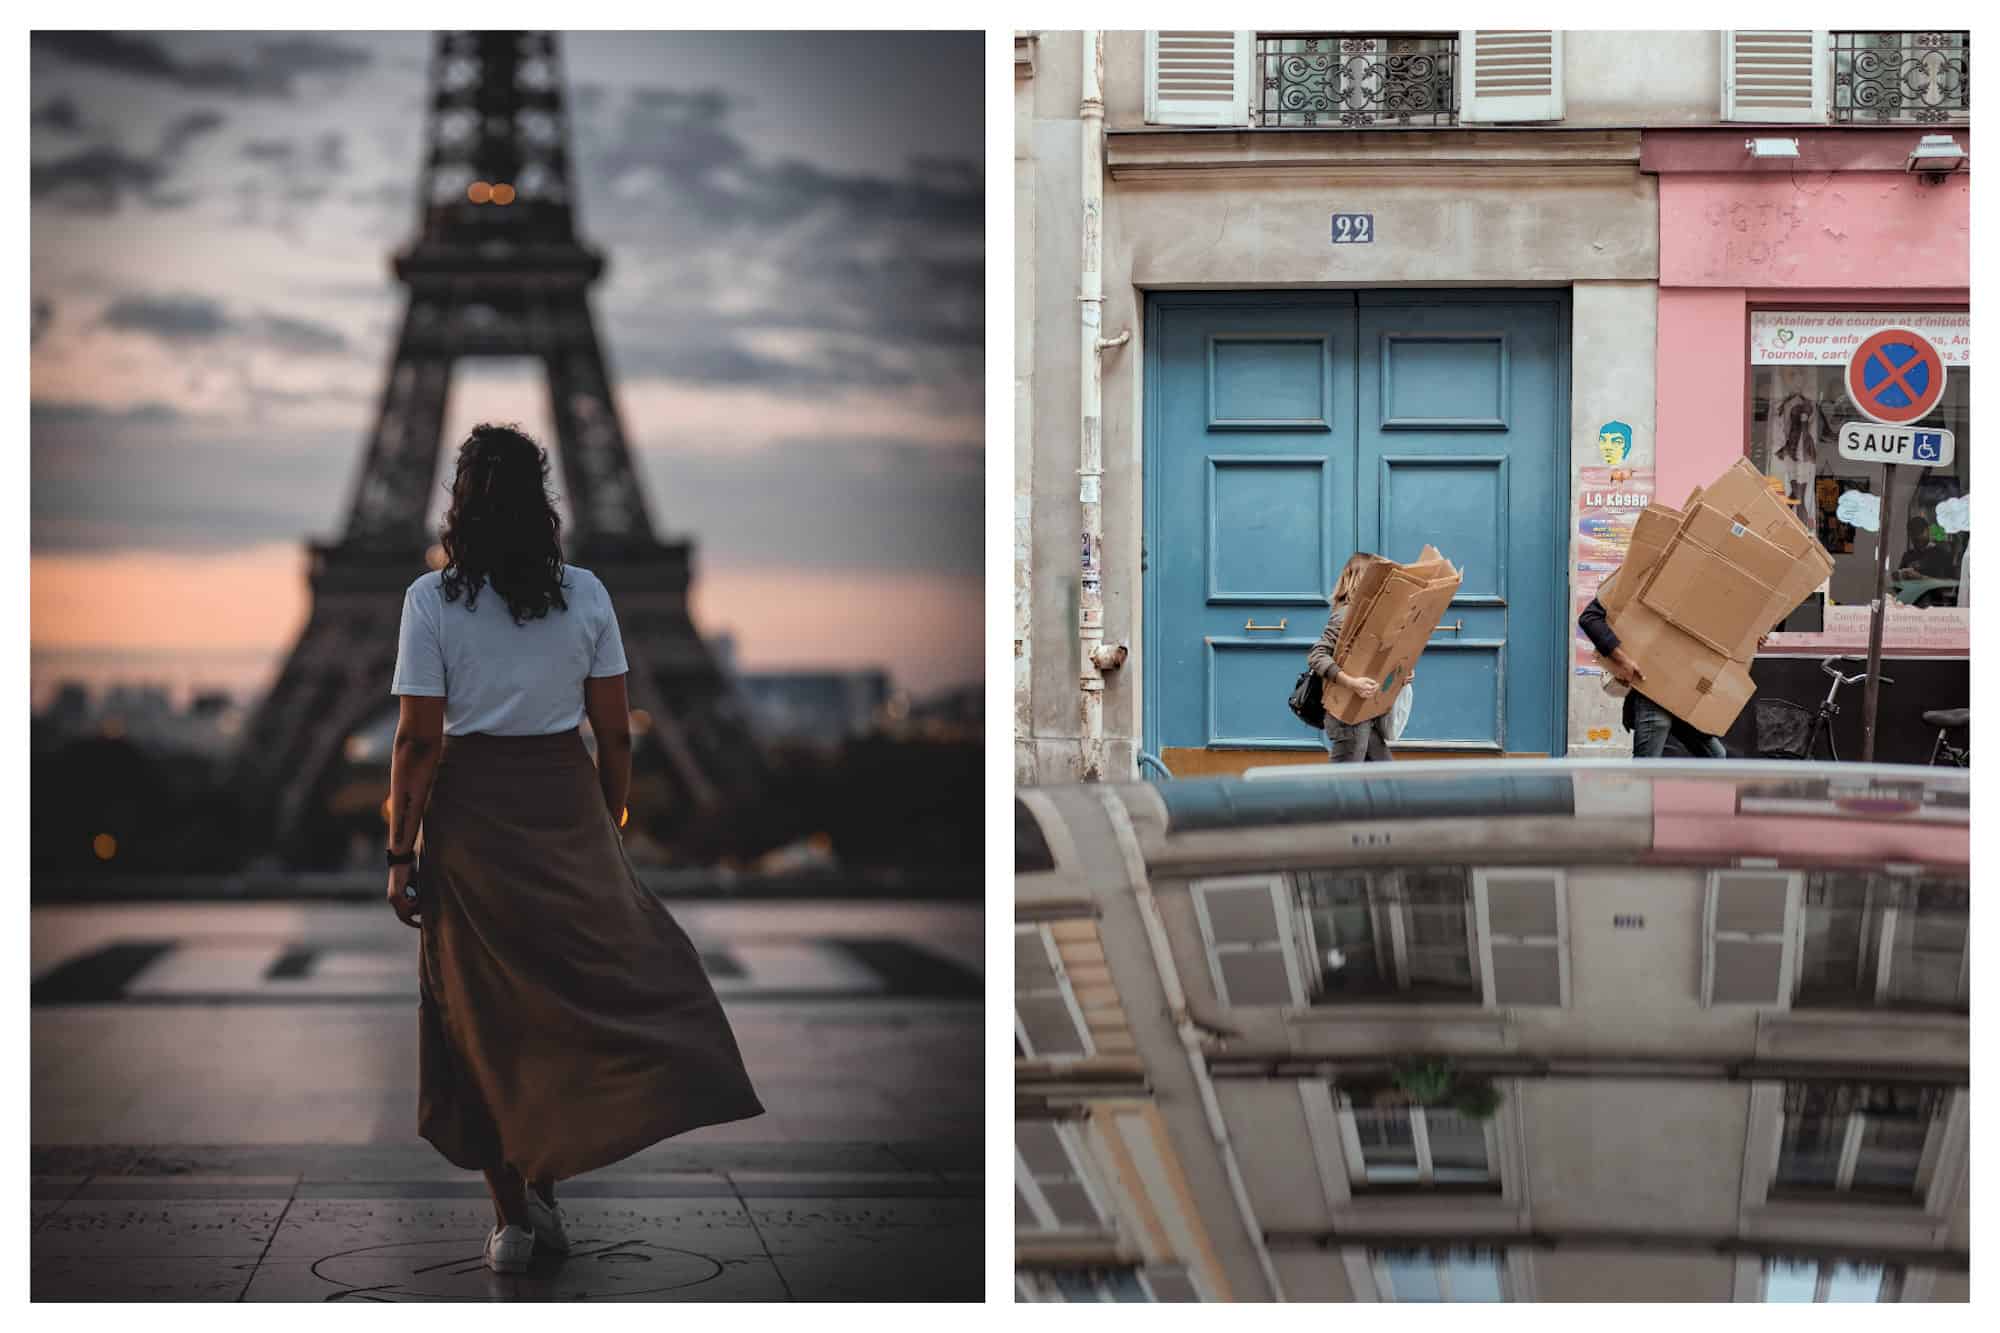 A woman at Trocadero, walking towards the Eiffel Tower at sunset (left). A couple carrying folded cardboard boxes on a Paris street passing a blue door and pink wall (right).